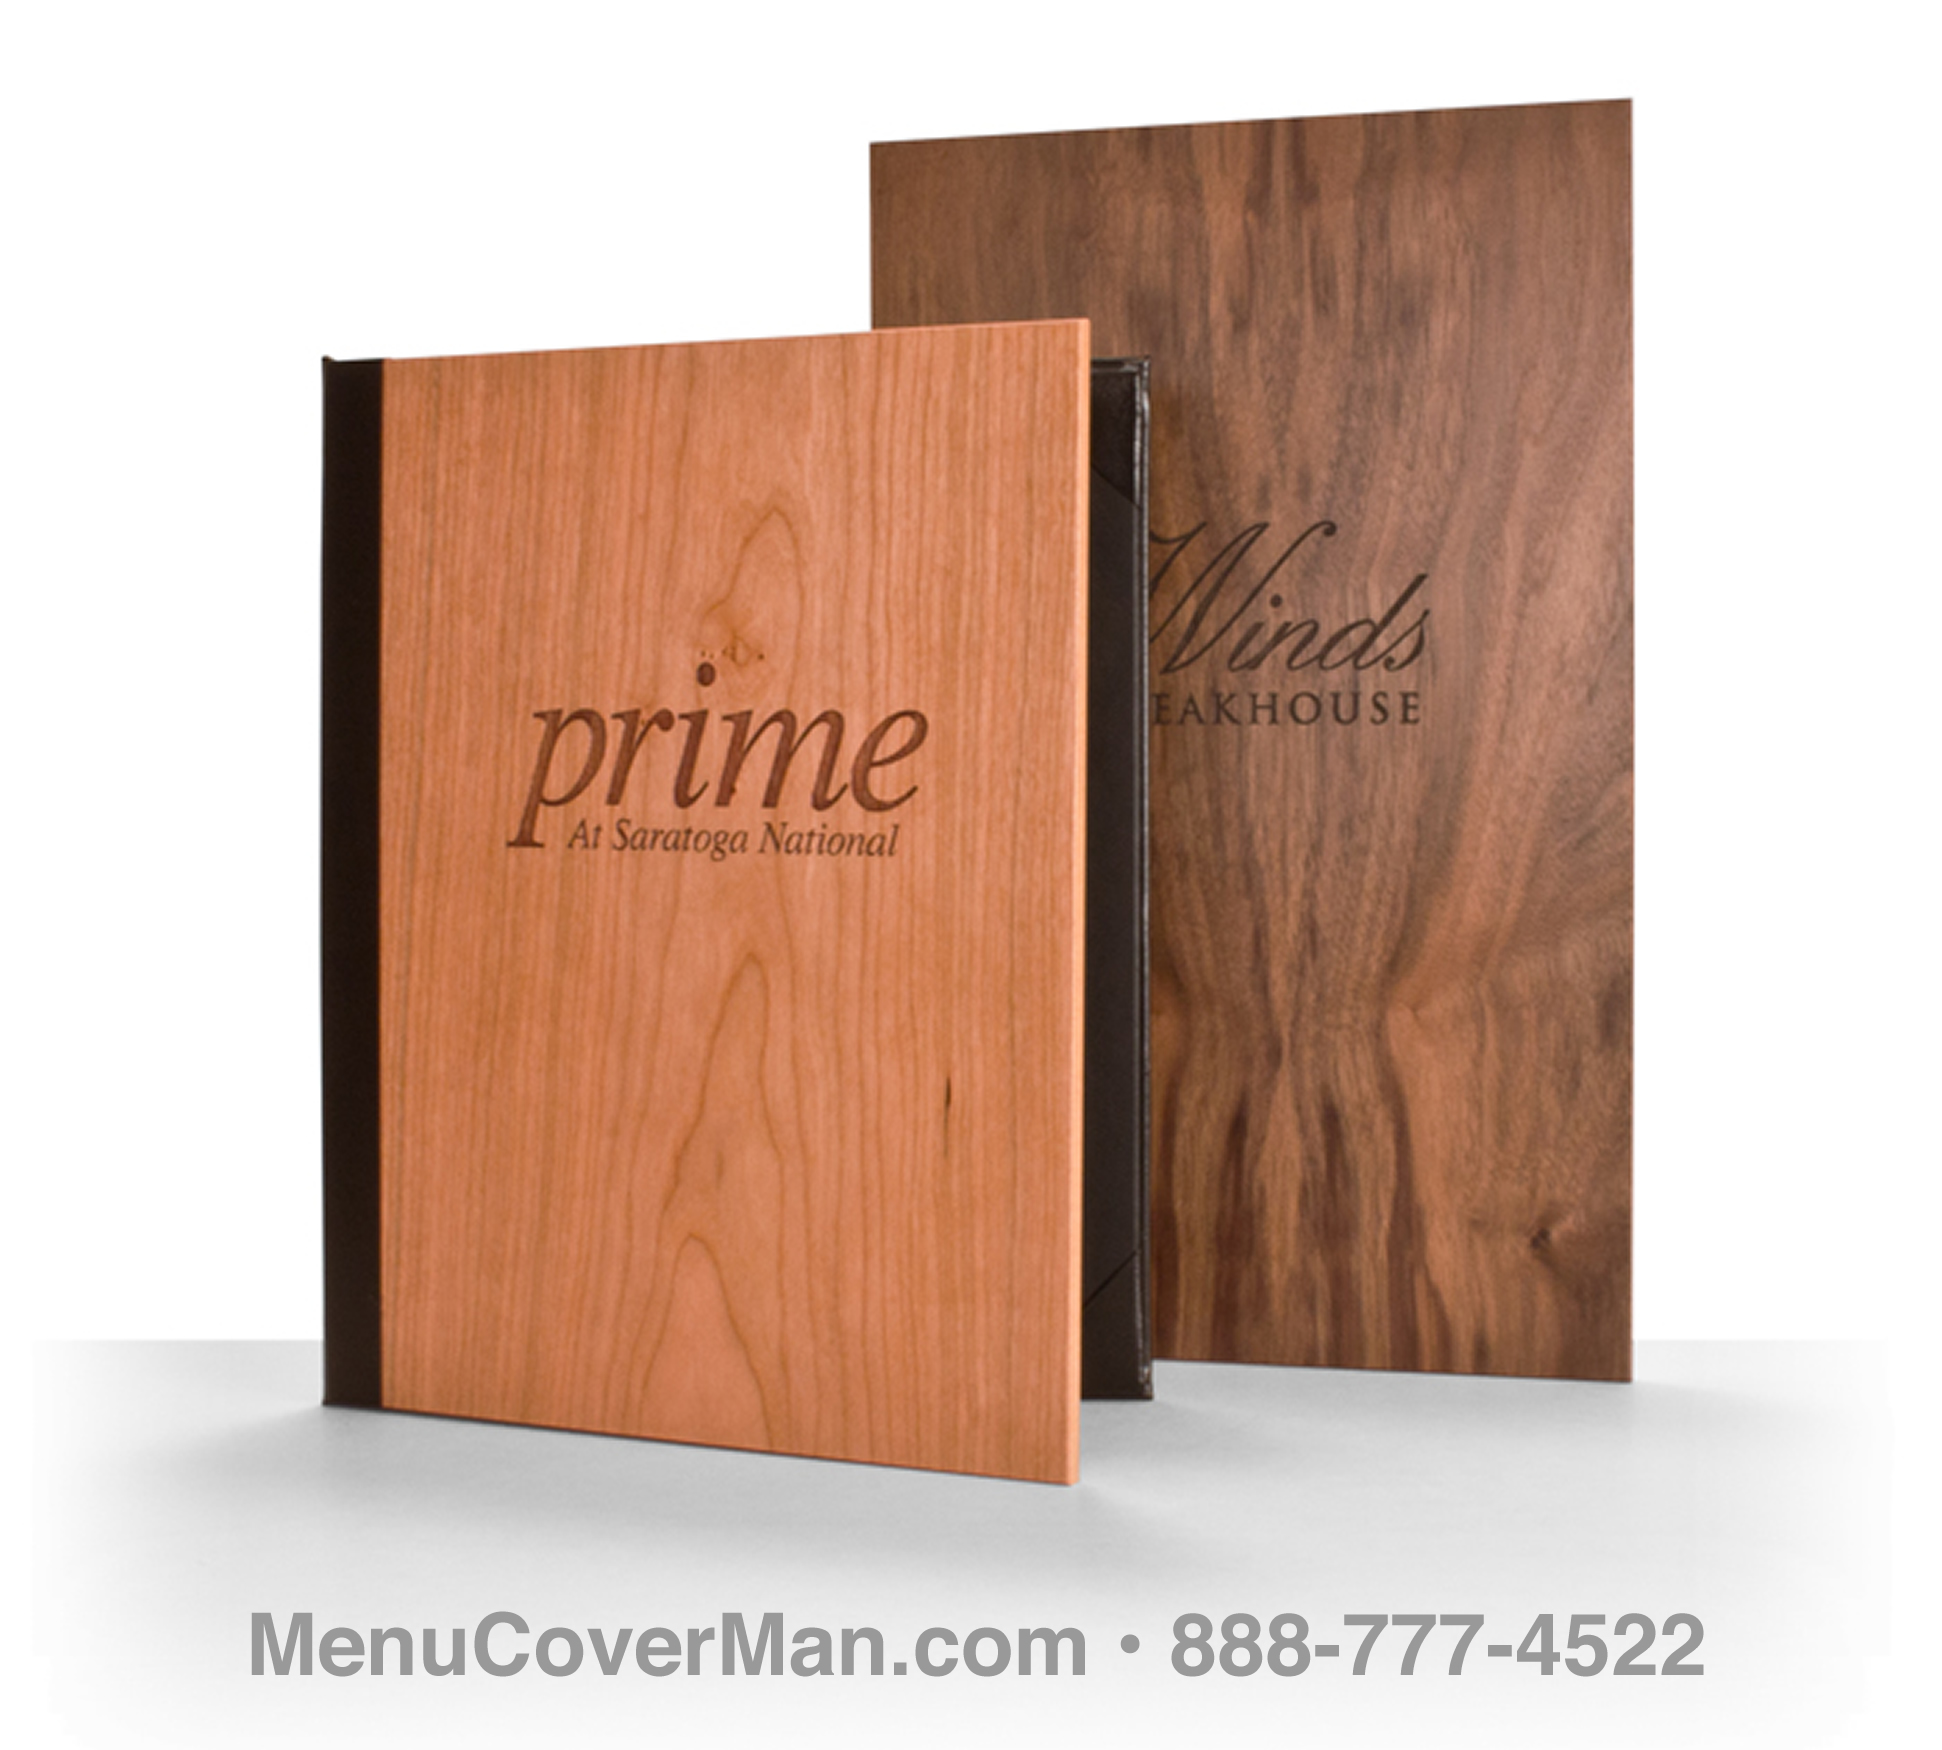 Authentic Wood Menu Covers Frontspiece.